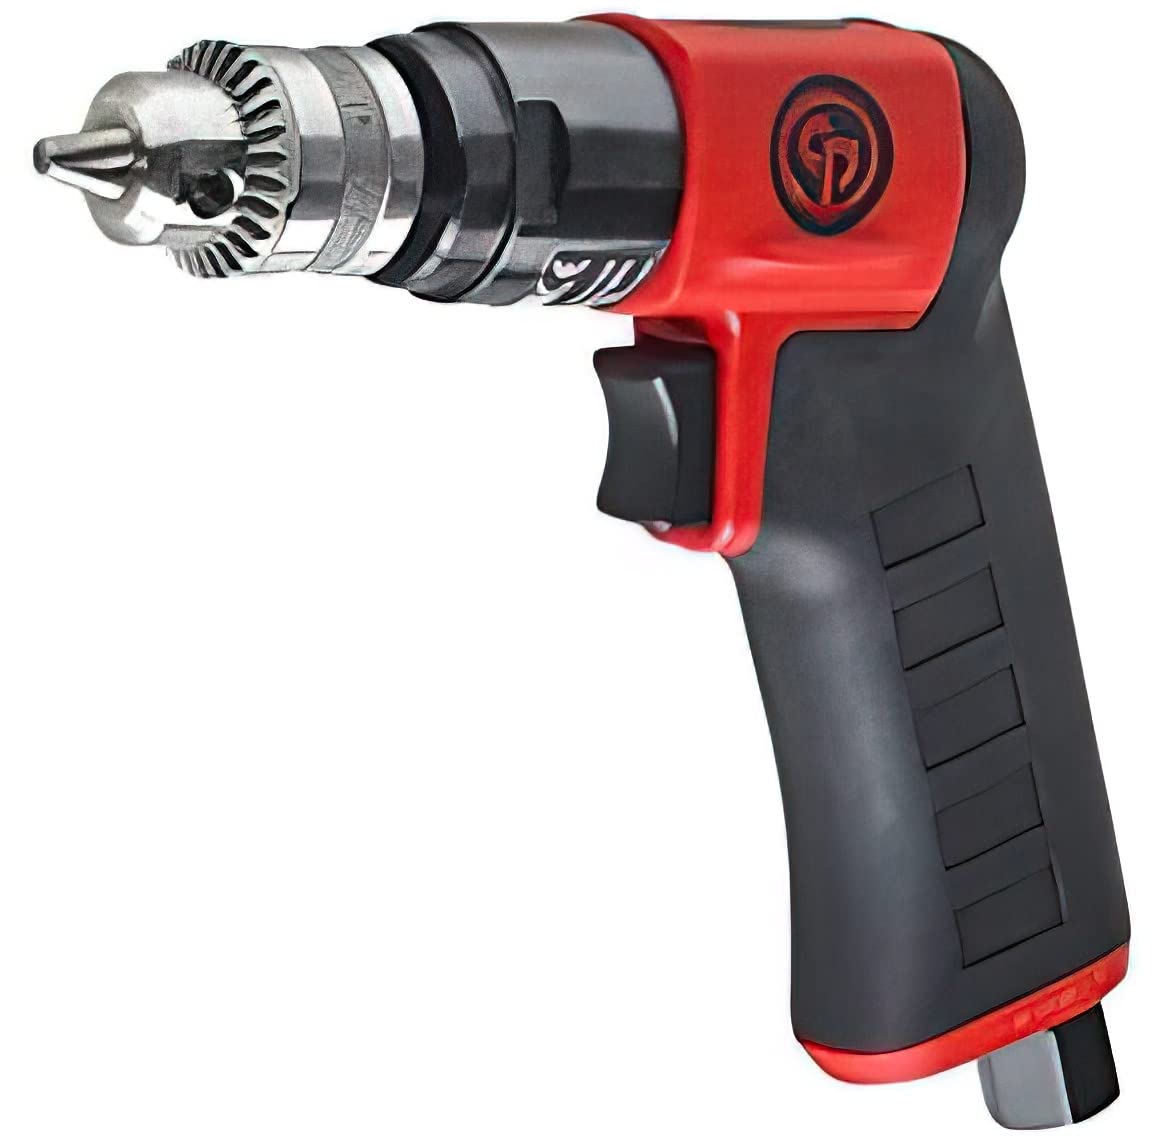 Chicago Pneumatic CP7300C - Air Power Drill, Hand Drill, Power Tools & Home Improvement, 1/4 Inch (6.5 mm), Keyed Chuck, Pistol Handle, 0.31 HP / 230 W, Stall Torque 1.9 ft. lbf / 2.6 NM - 3300 RPM